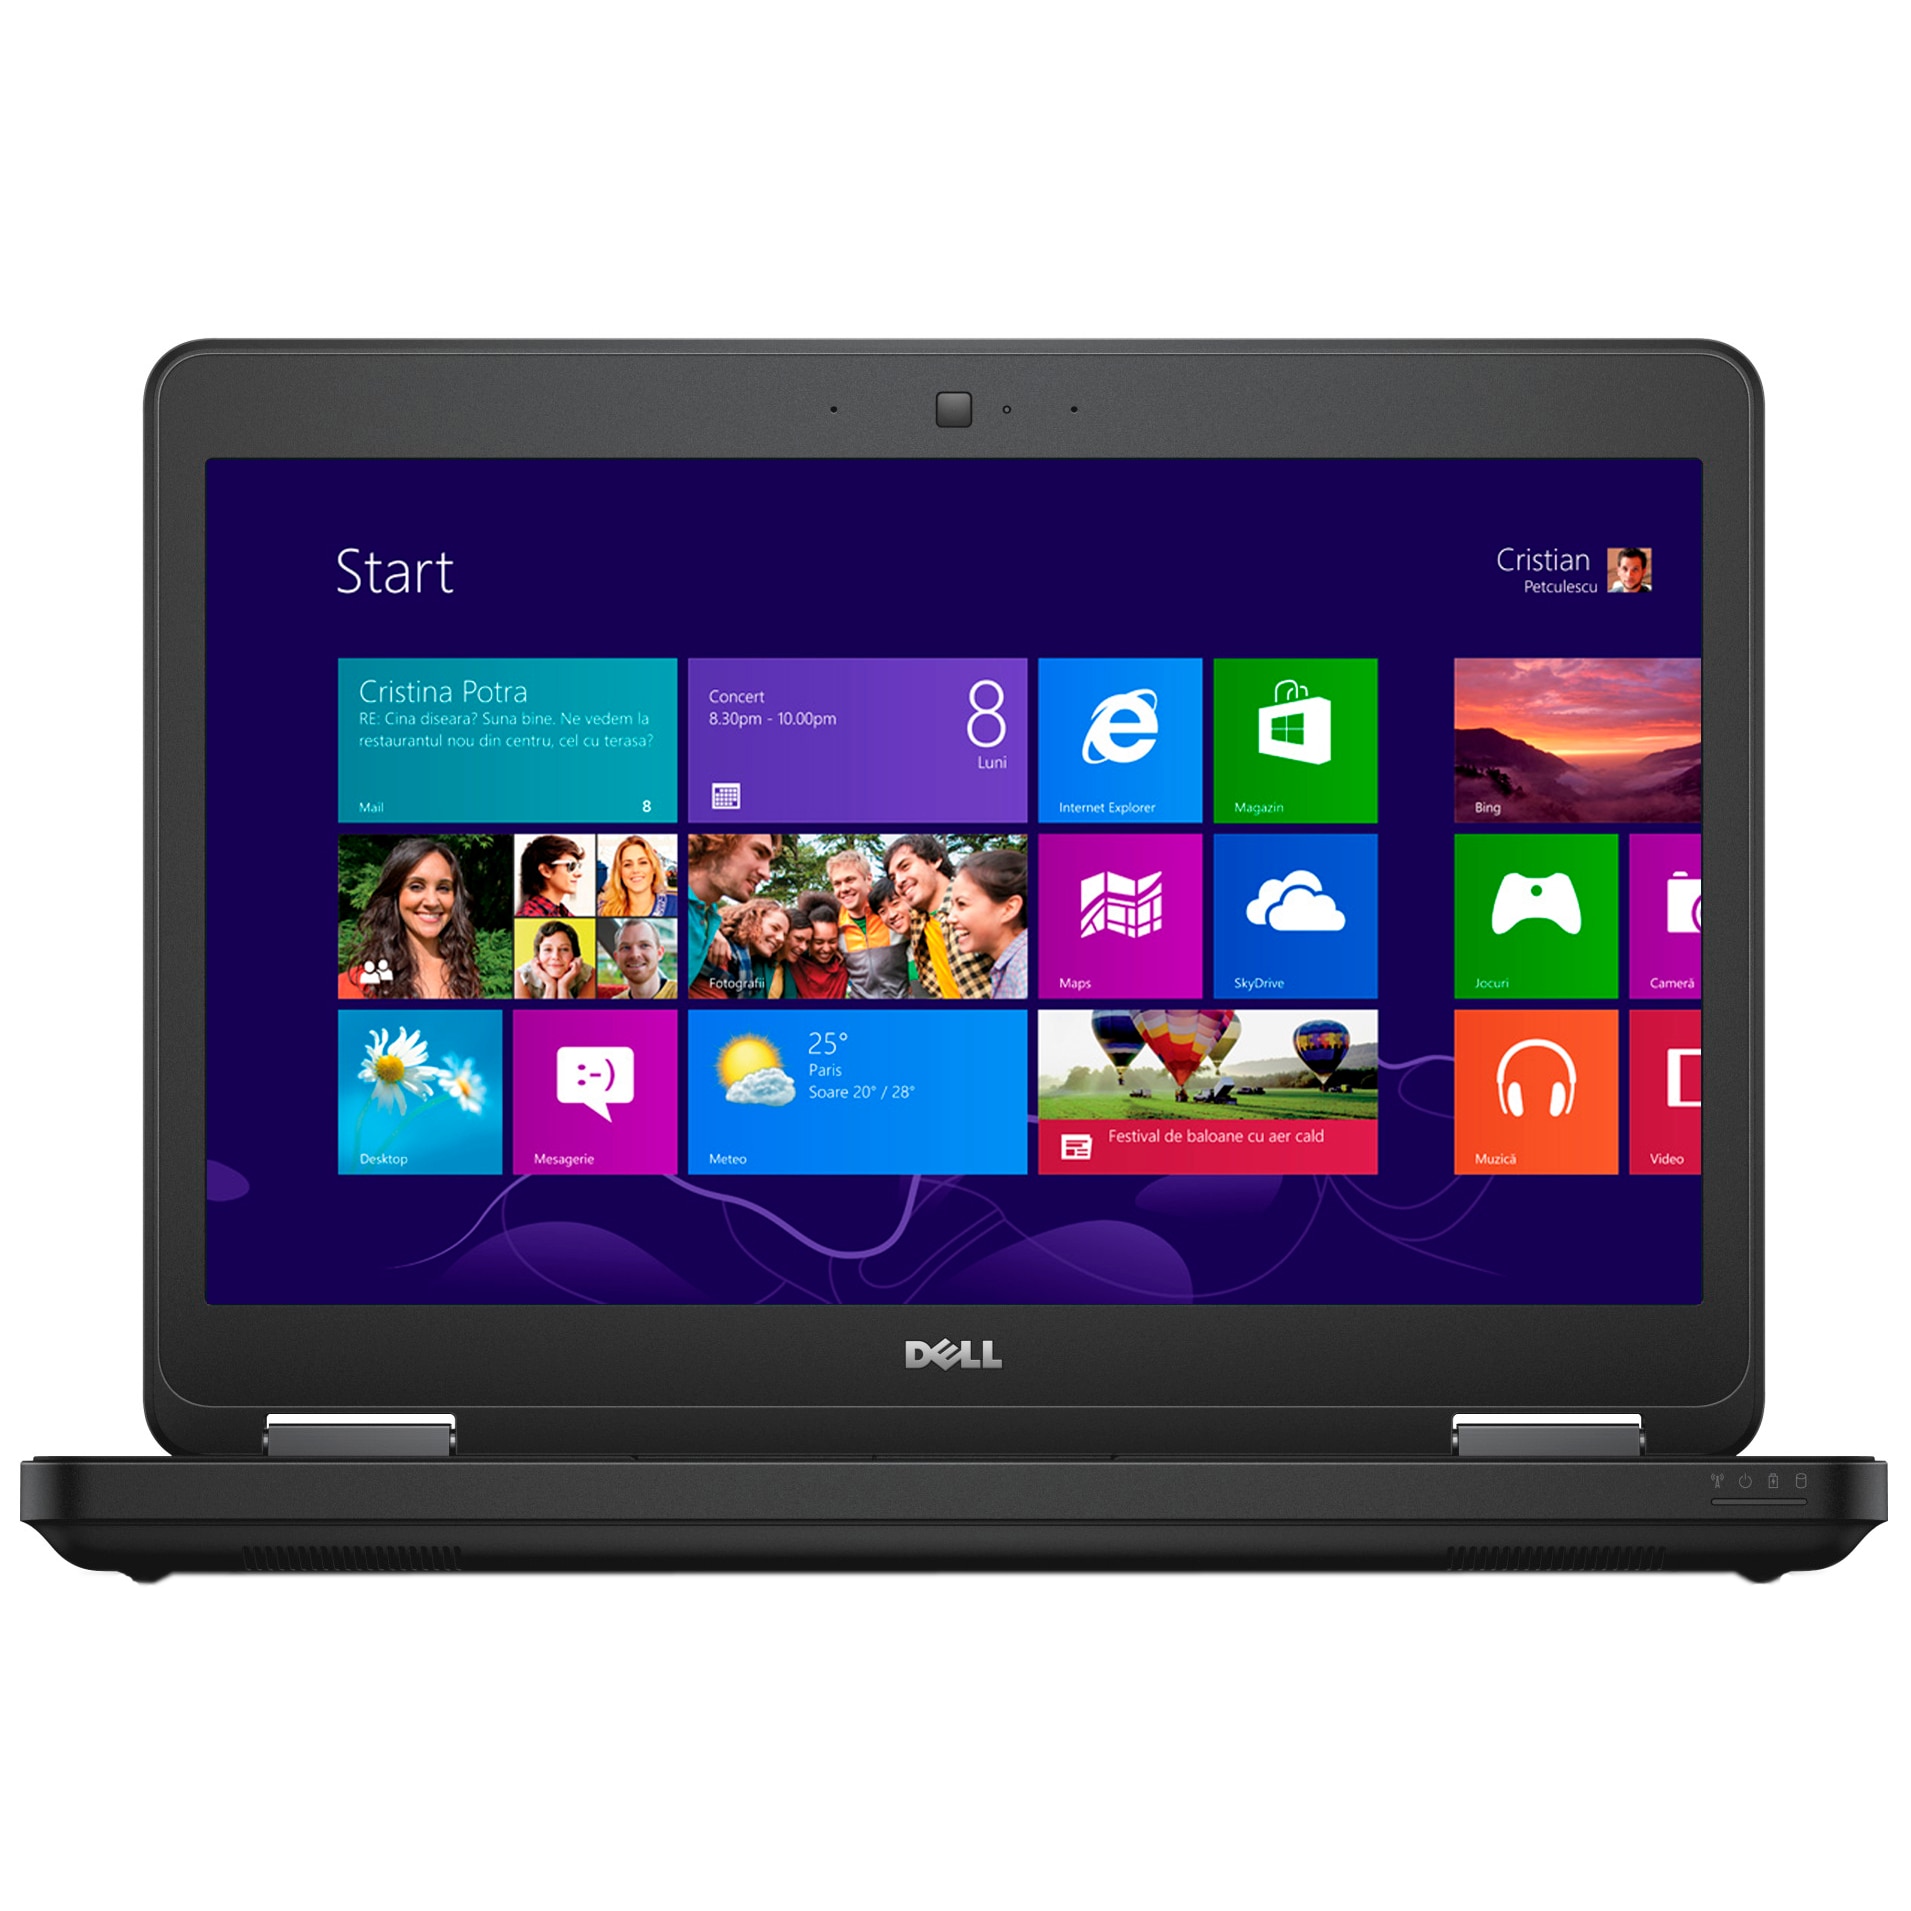 Laptop DELL Latitude 5440, 14.0 FHD (1920x1080) Non-Touch, AG, IPS, 250 nits, FHD Cam, WLAN, EPEAT 2018 Registered (Gold), ENERGY STAR Qualified, Single Pointing, Finger Print Reader (w ControlVault